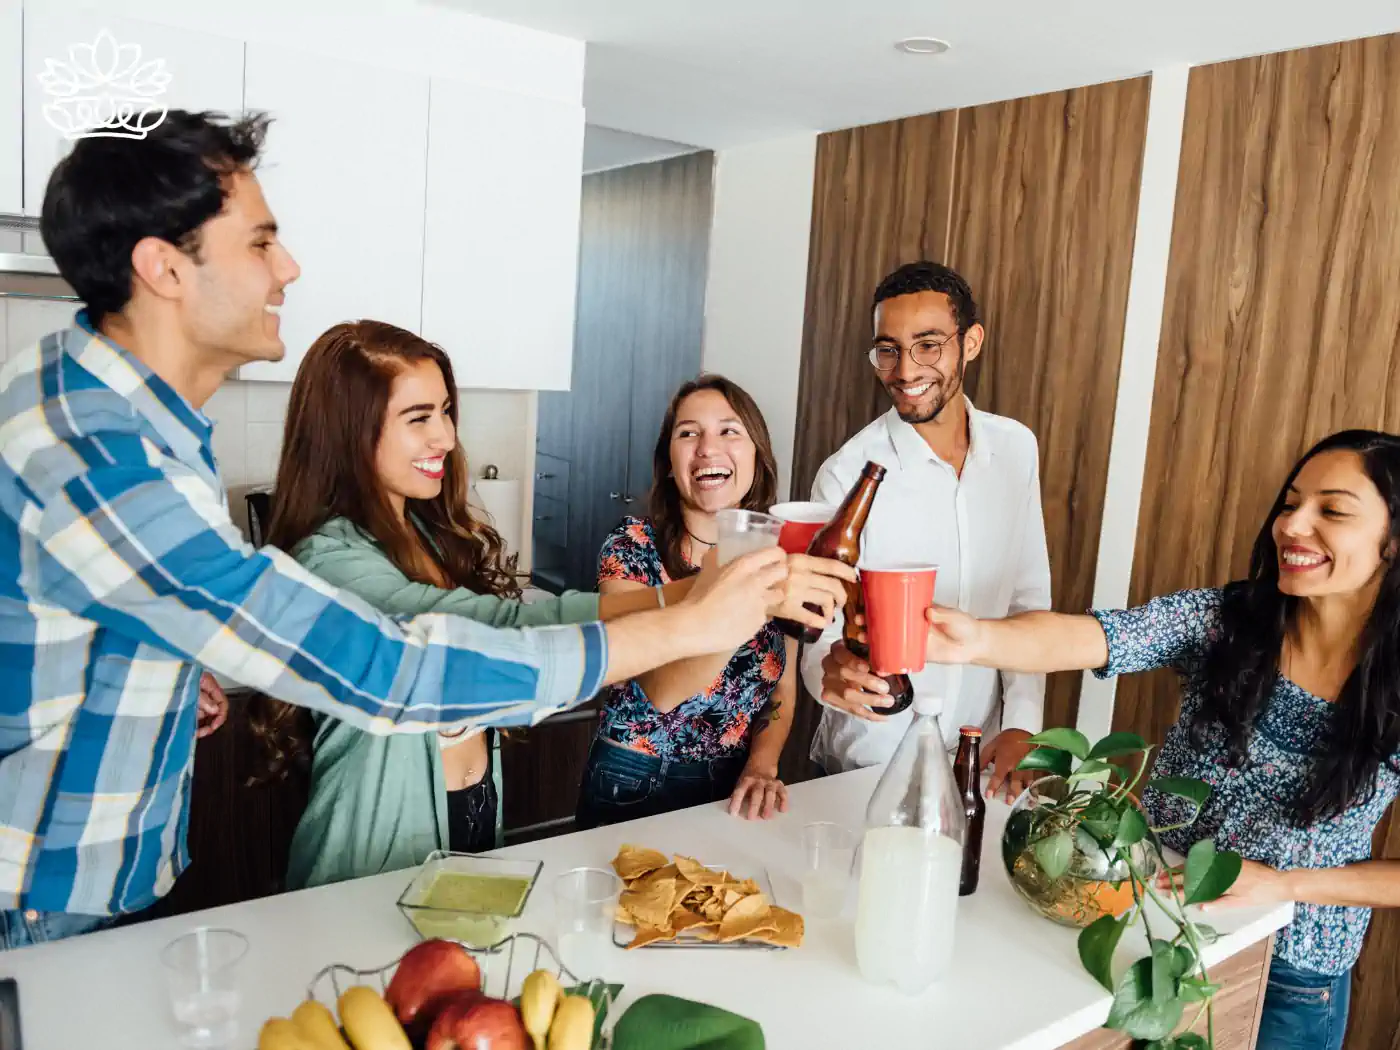 Friends toasting drinks at a lively housewarming party, sharing joy and laughter in a cozy kitchen. Fabulous Flowers and Gifts - Housewarming. Delivered with Heart.